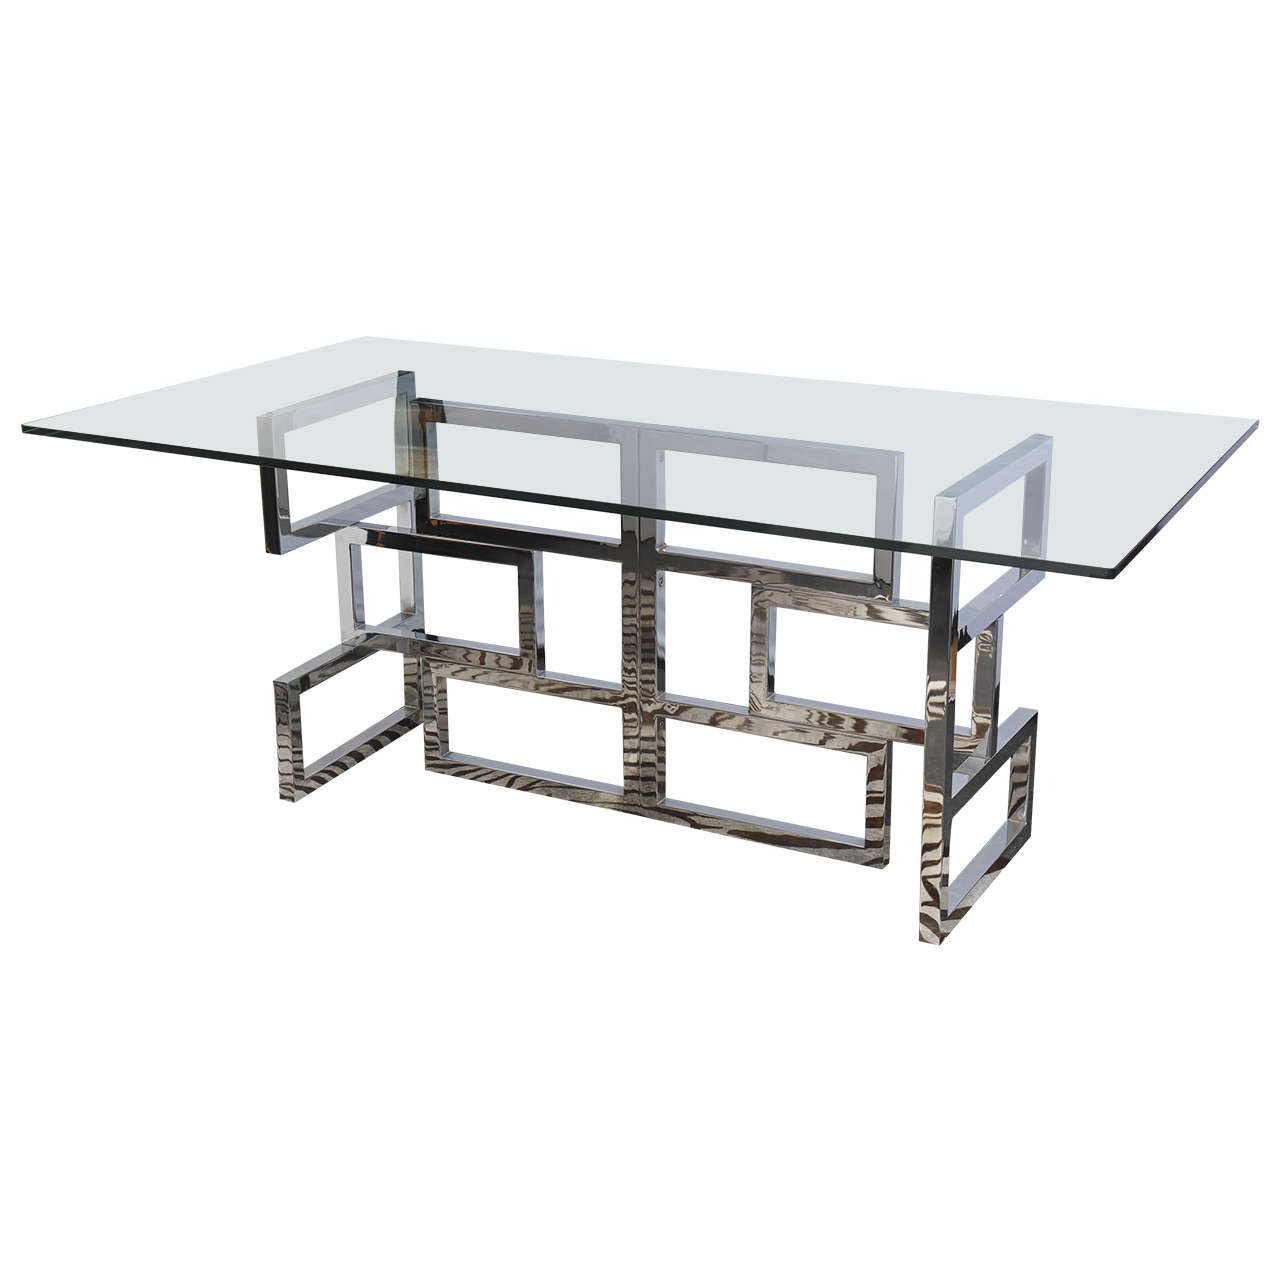 1970s Modernist Chrome and Glass Dining Table